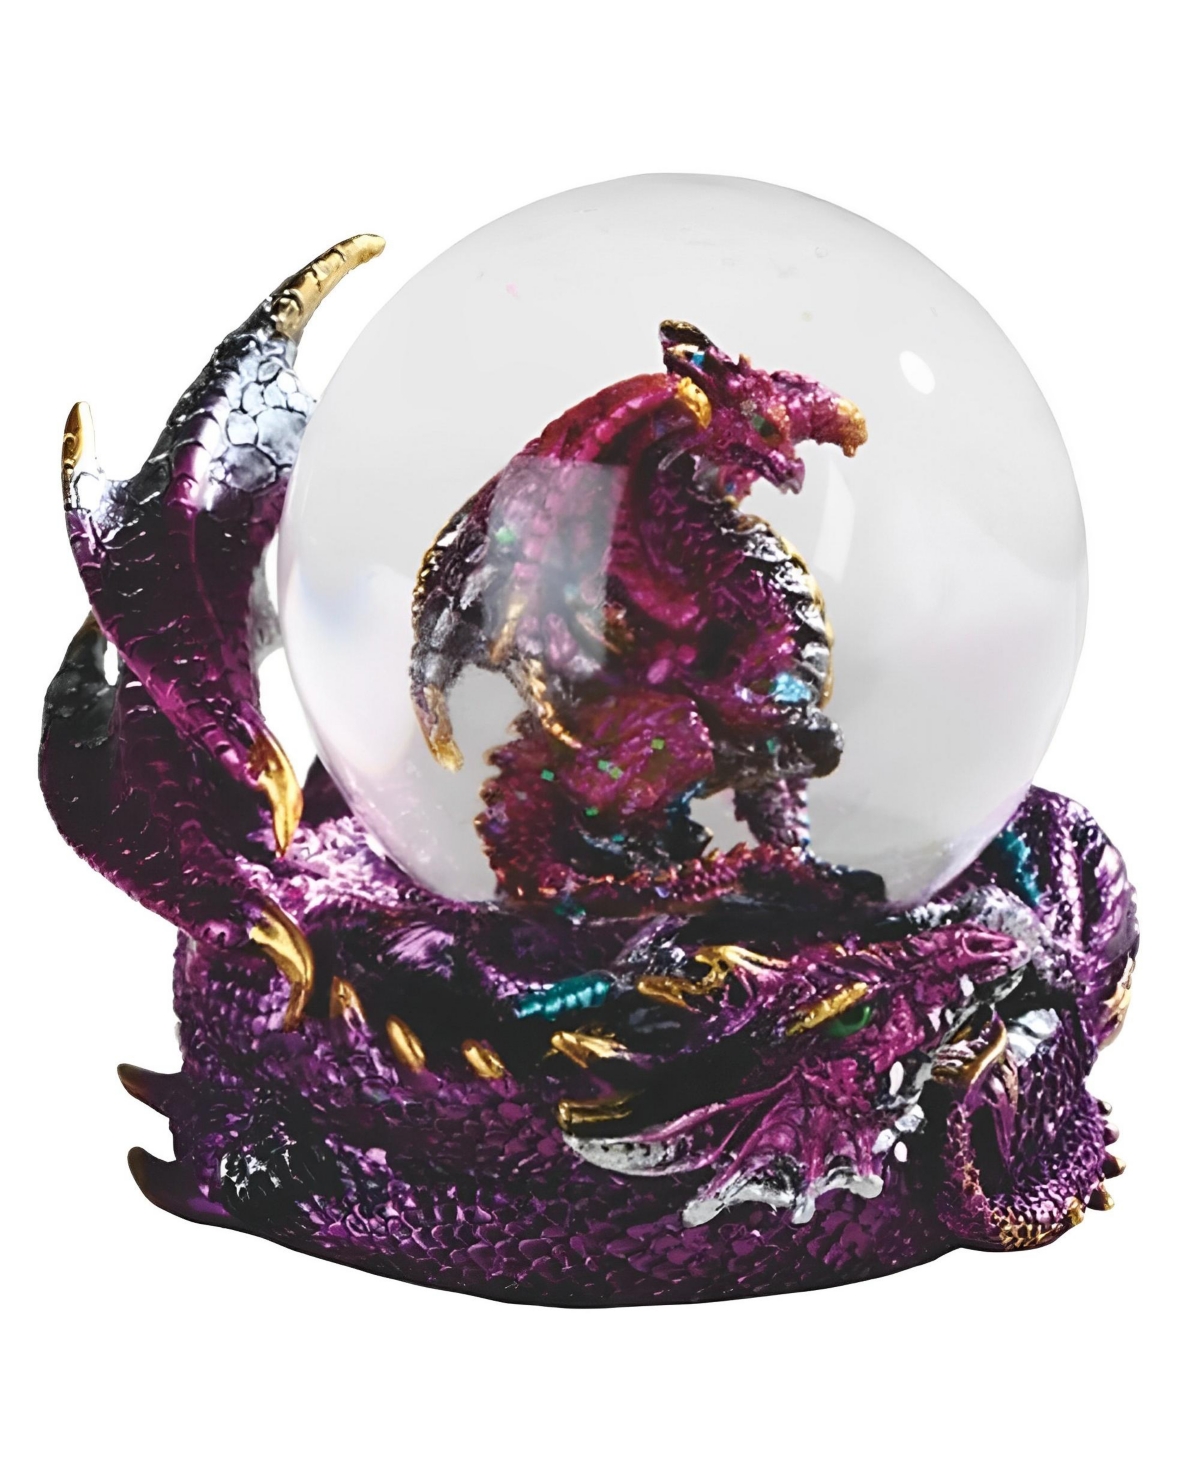 4.25"W Purple Dragon Glitter Snow Globe Figurine Home Decor Perfect Gift for House Warming, Holidays and Birthdays - Multicolor